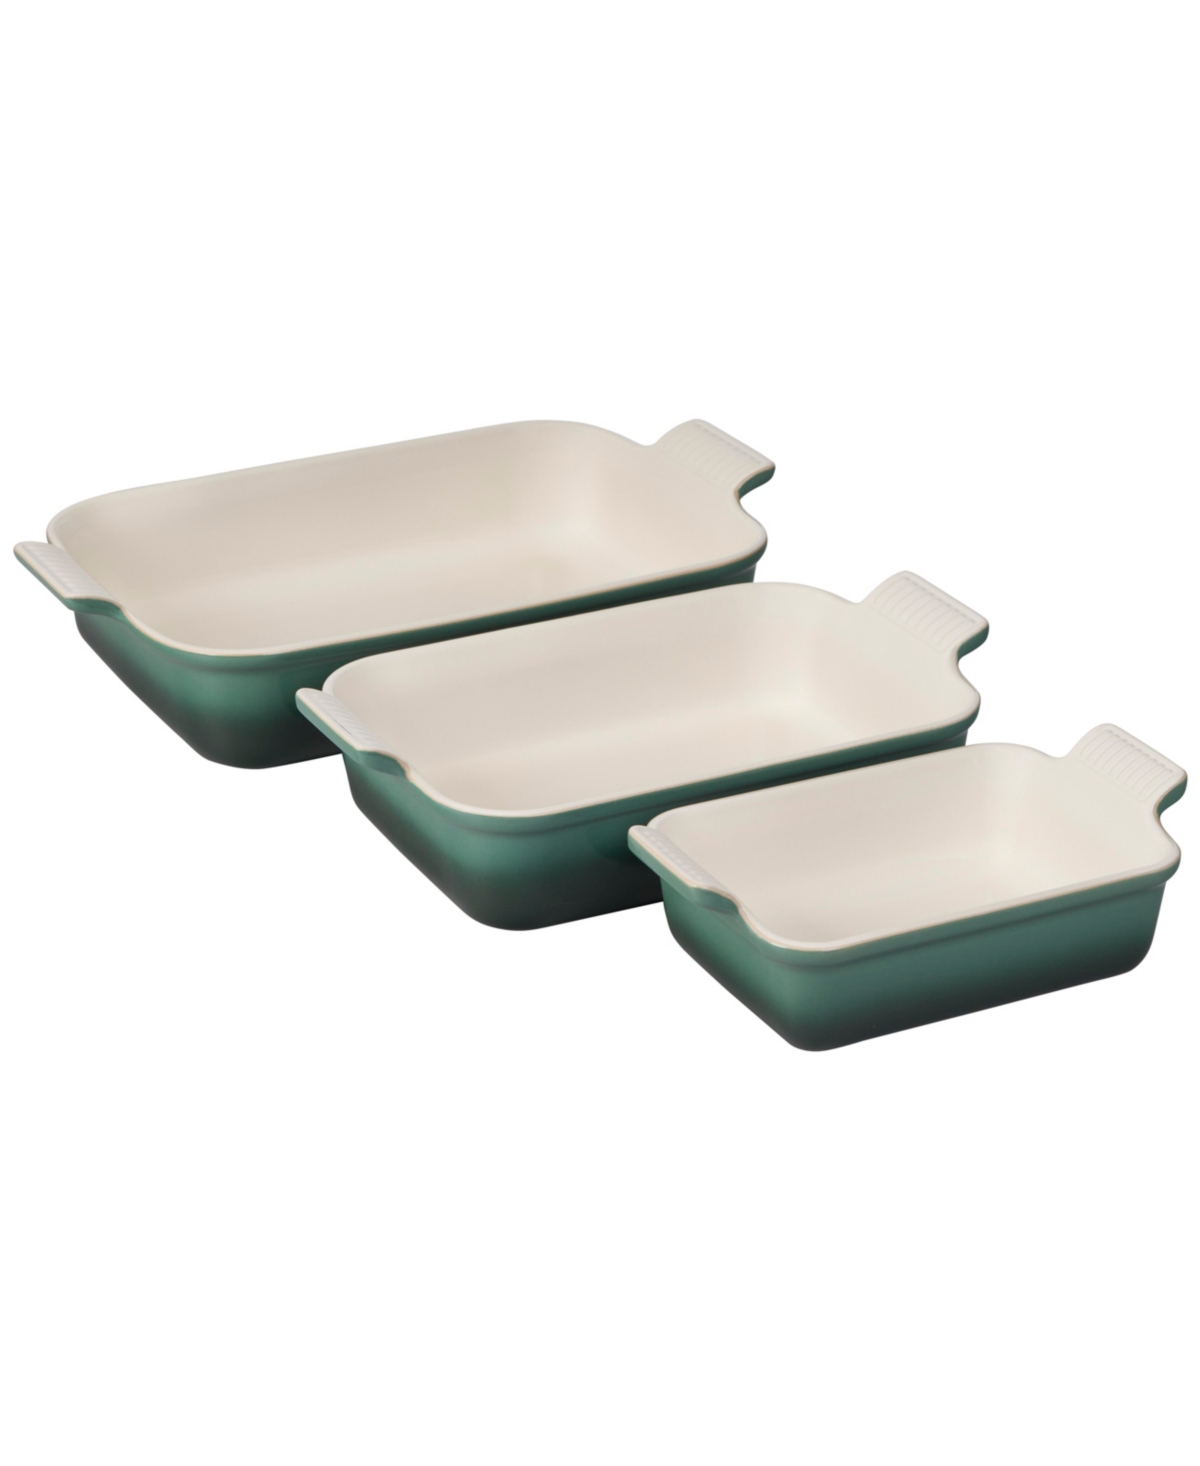 Le Creuset The Heritage Set Of 3 Rectangular Baking Dishes In Artichaut